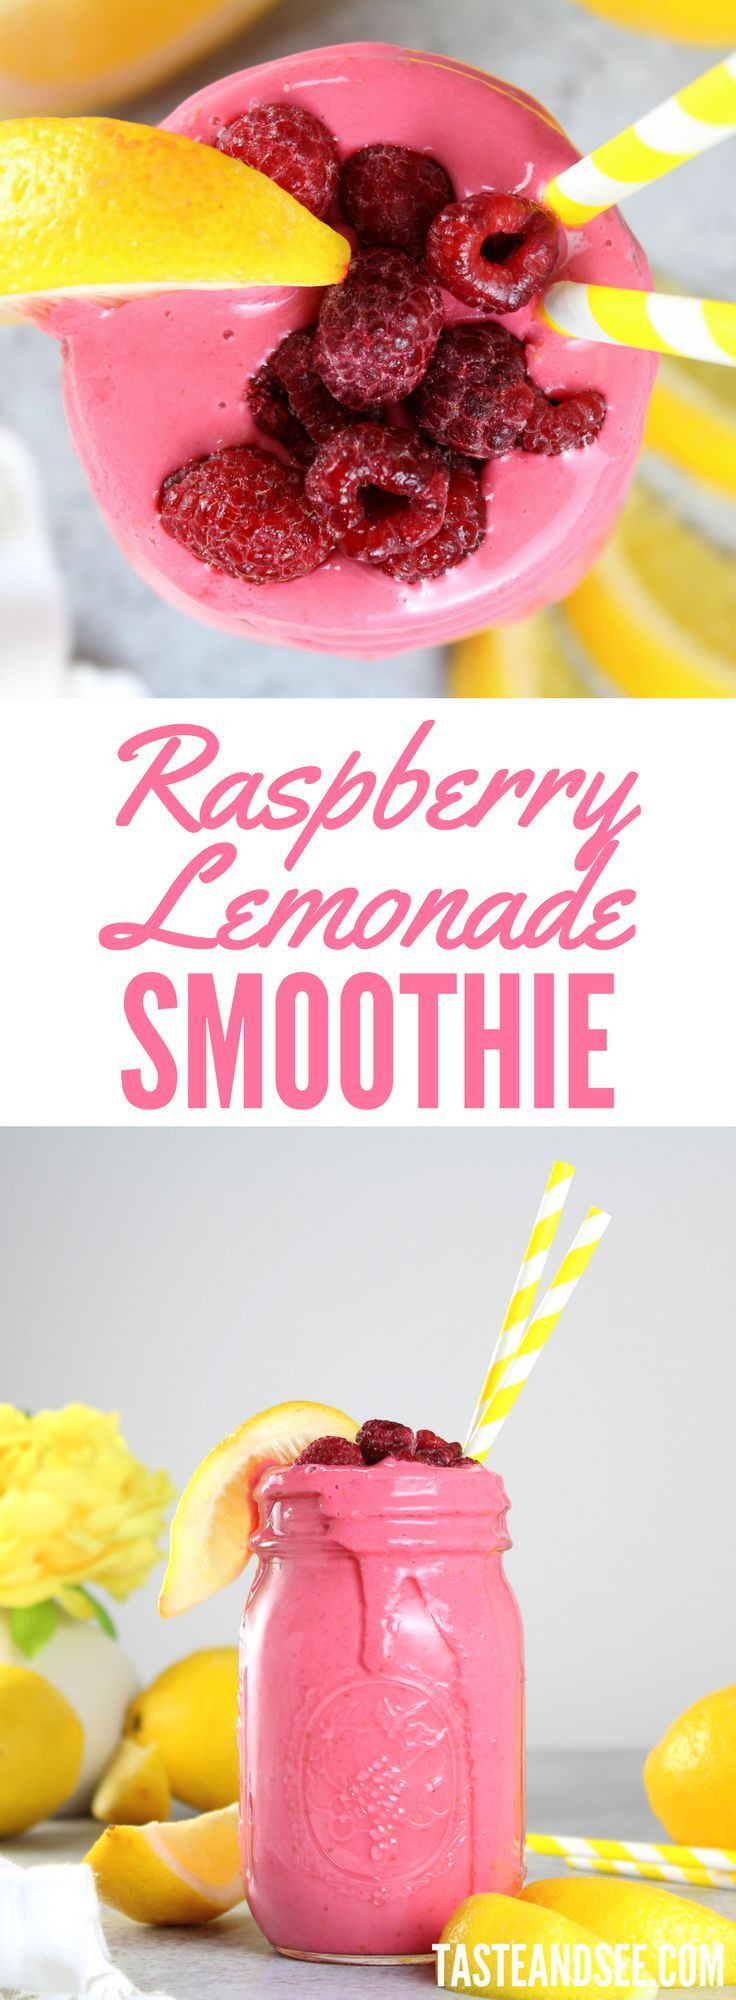 Low Calorie High Protein Smoothies
 25 best ideas about Low calorie smoothies on Pinterest